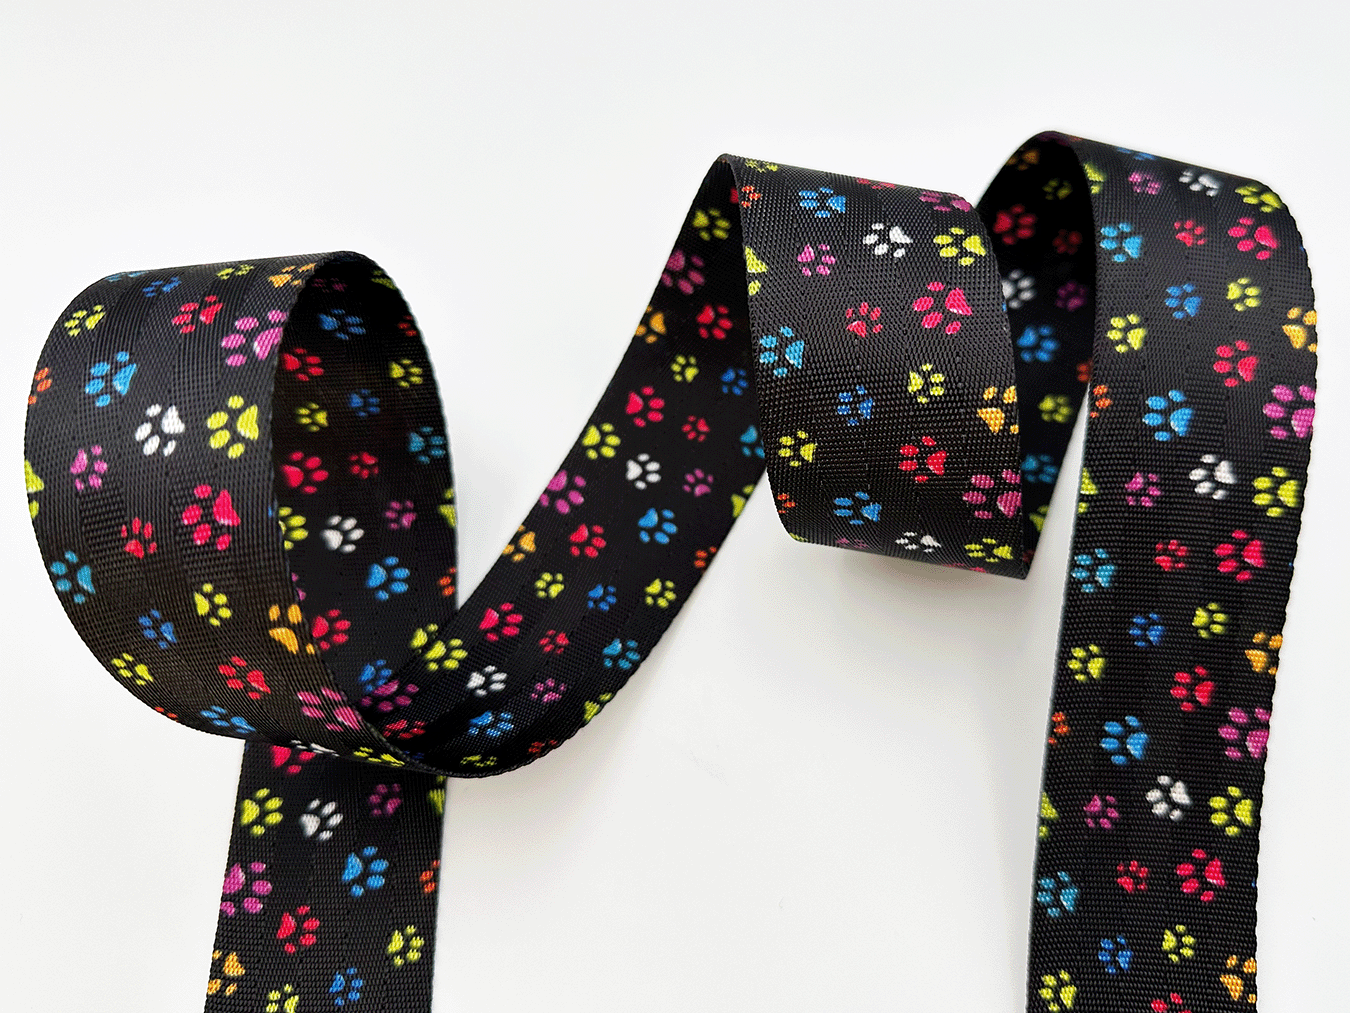 38mm Rainbow Doggie Paws Print Webbing, Bag Straps, 1.5" wide in